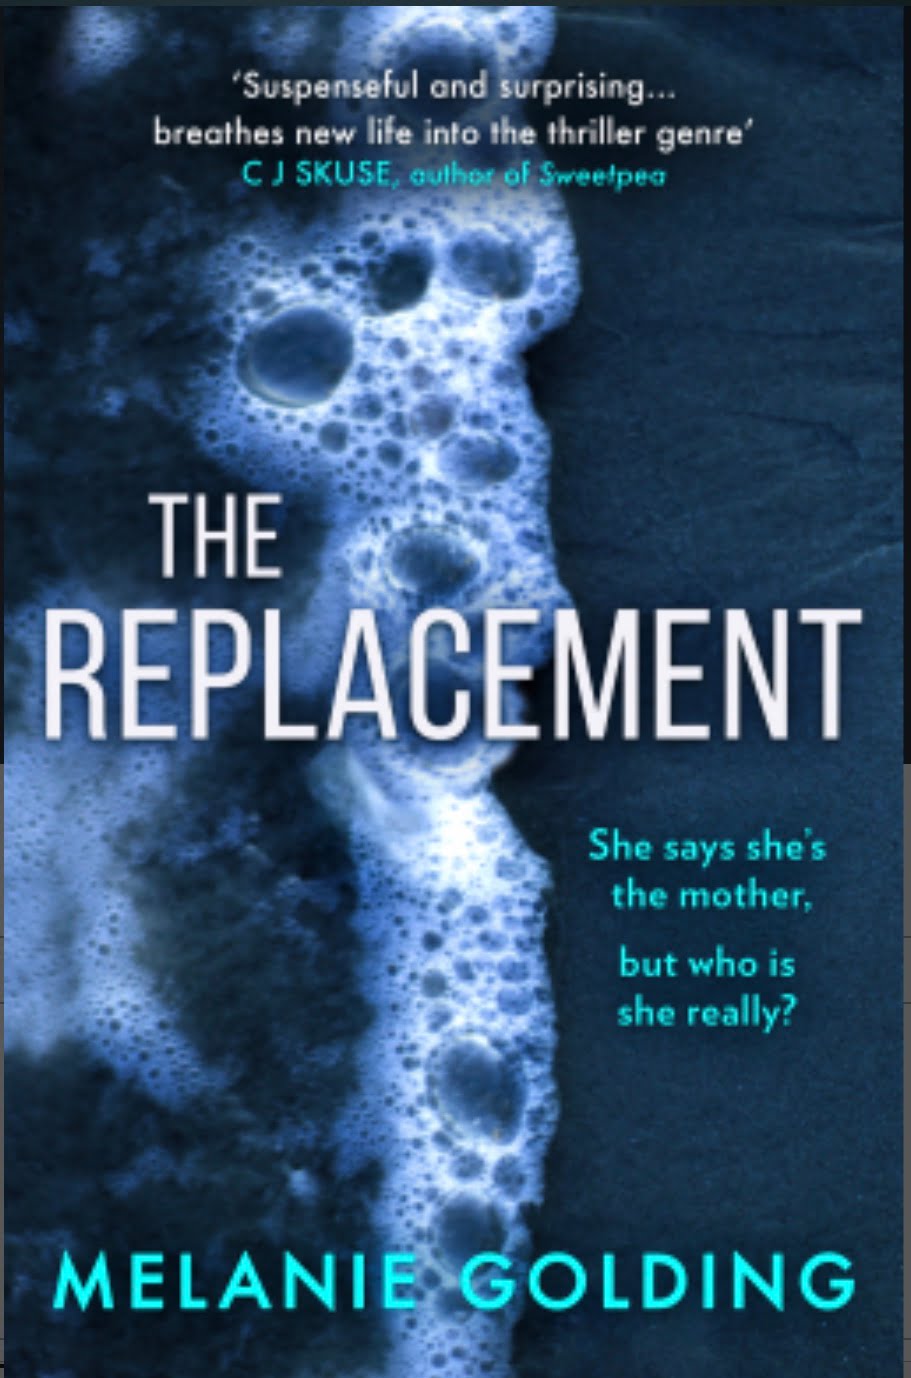 THE REPLACEMENT BY MELANIE GOLDING – BOOK REVIEW